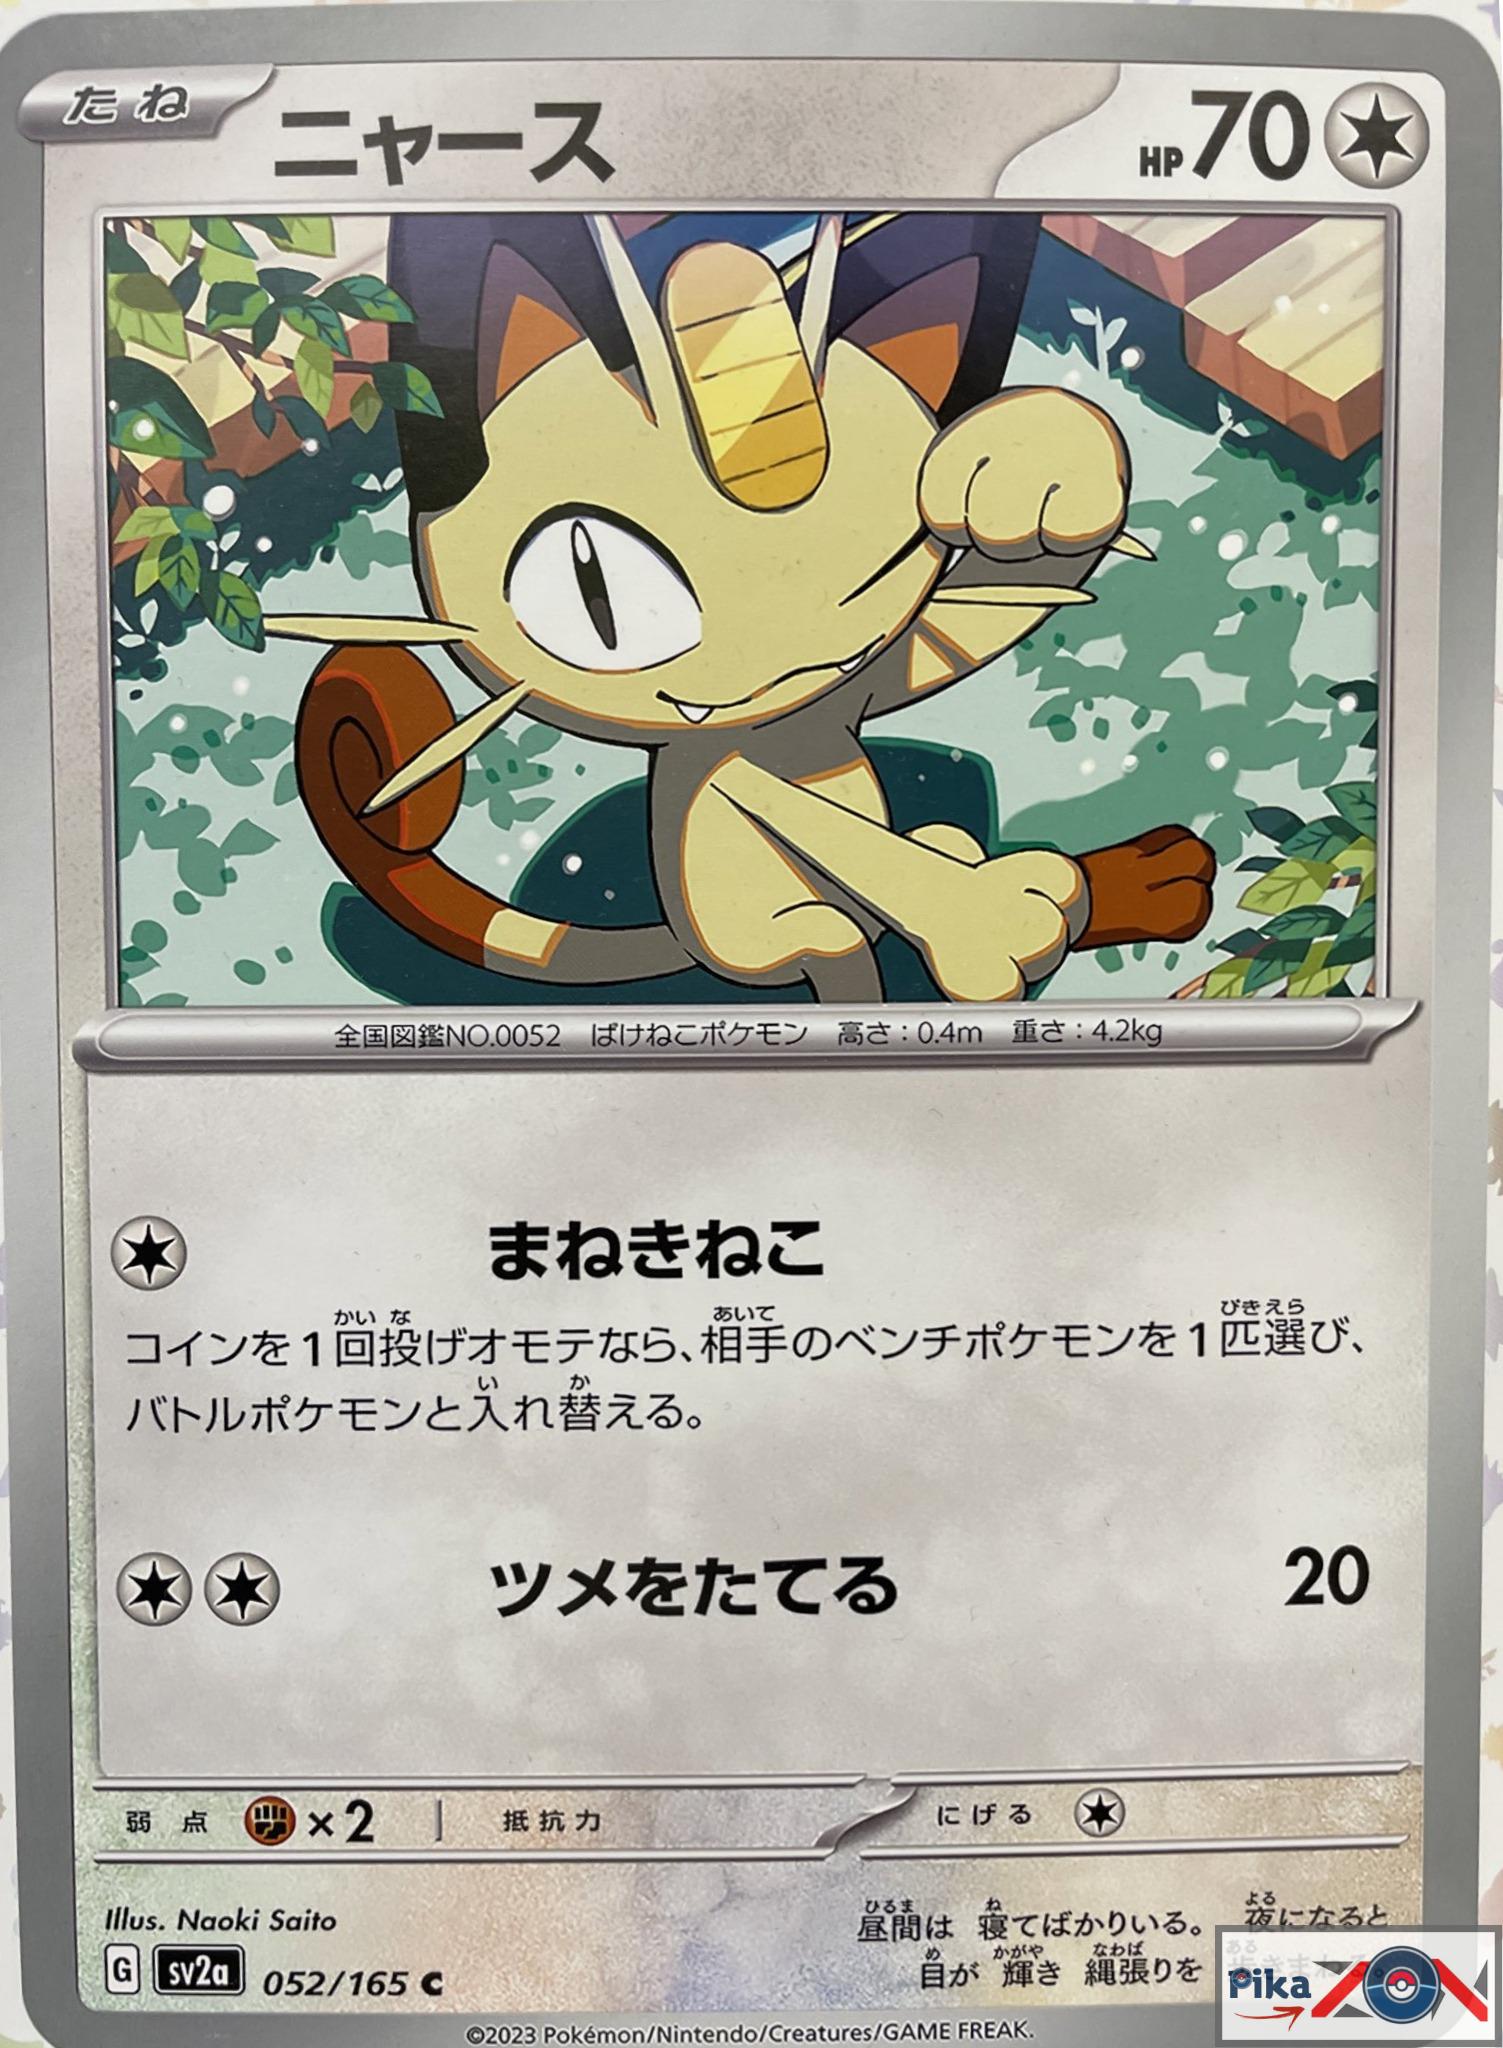 Meowth – Colorless – HP70-pikazon